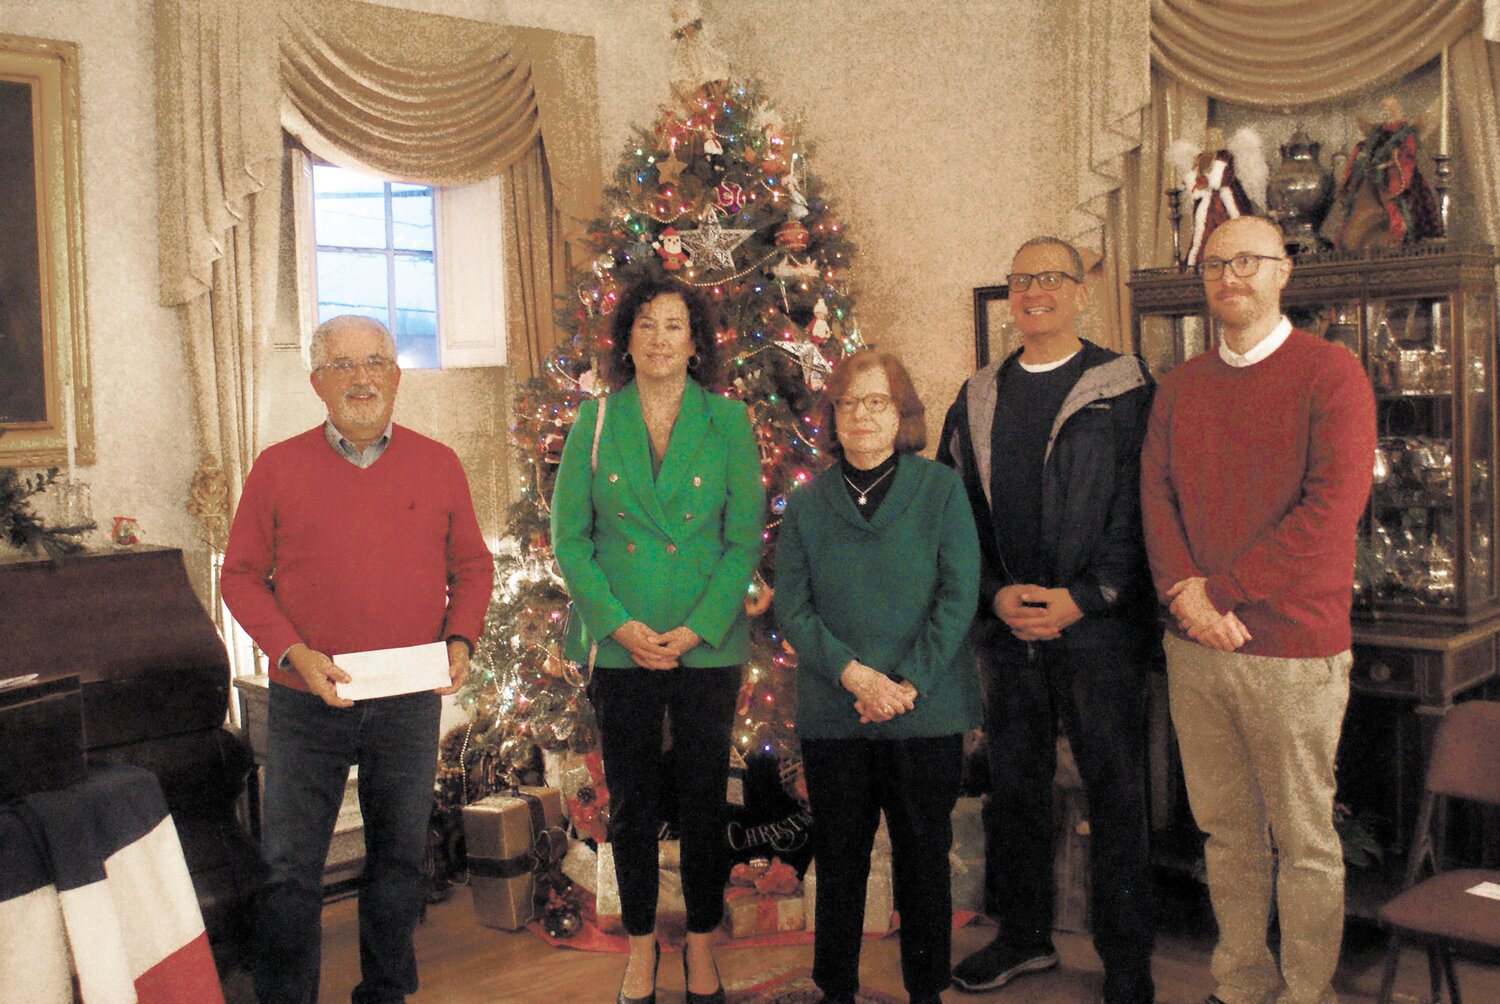 THE SEASON OF GIVING: Director of Community Development Ernest Tommasiello along with City councilors Jessica Marino, Robert Ferri, and John Donegan present Sandra Moyer with a gift from City Hall.